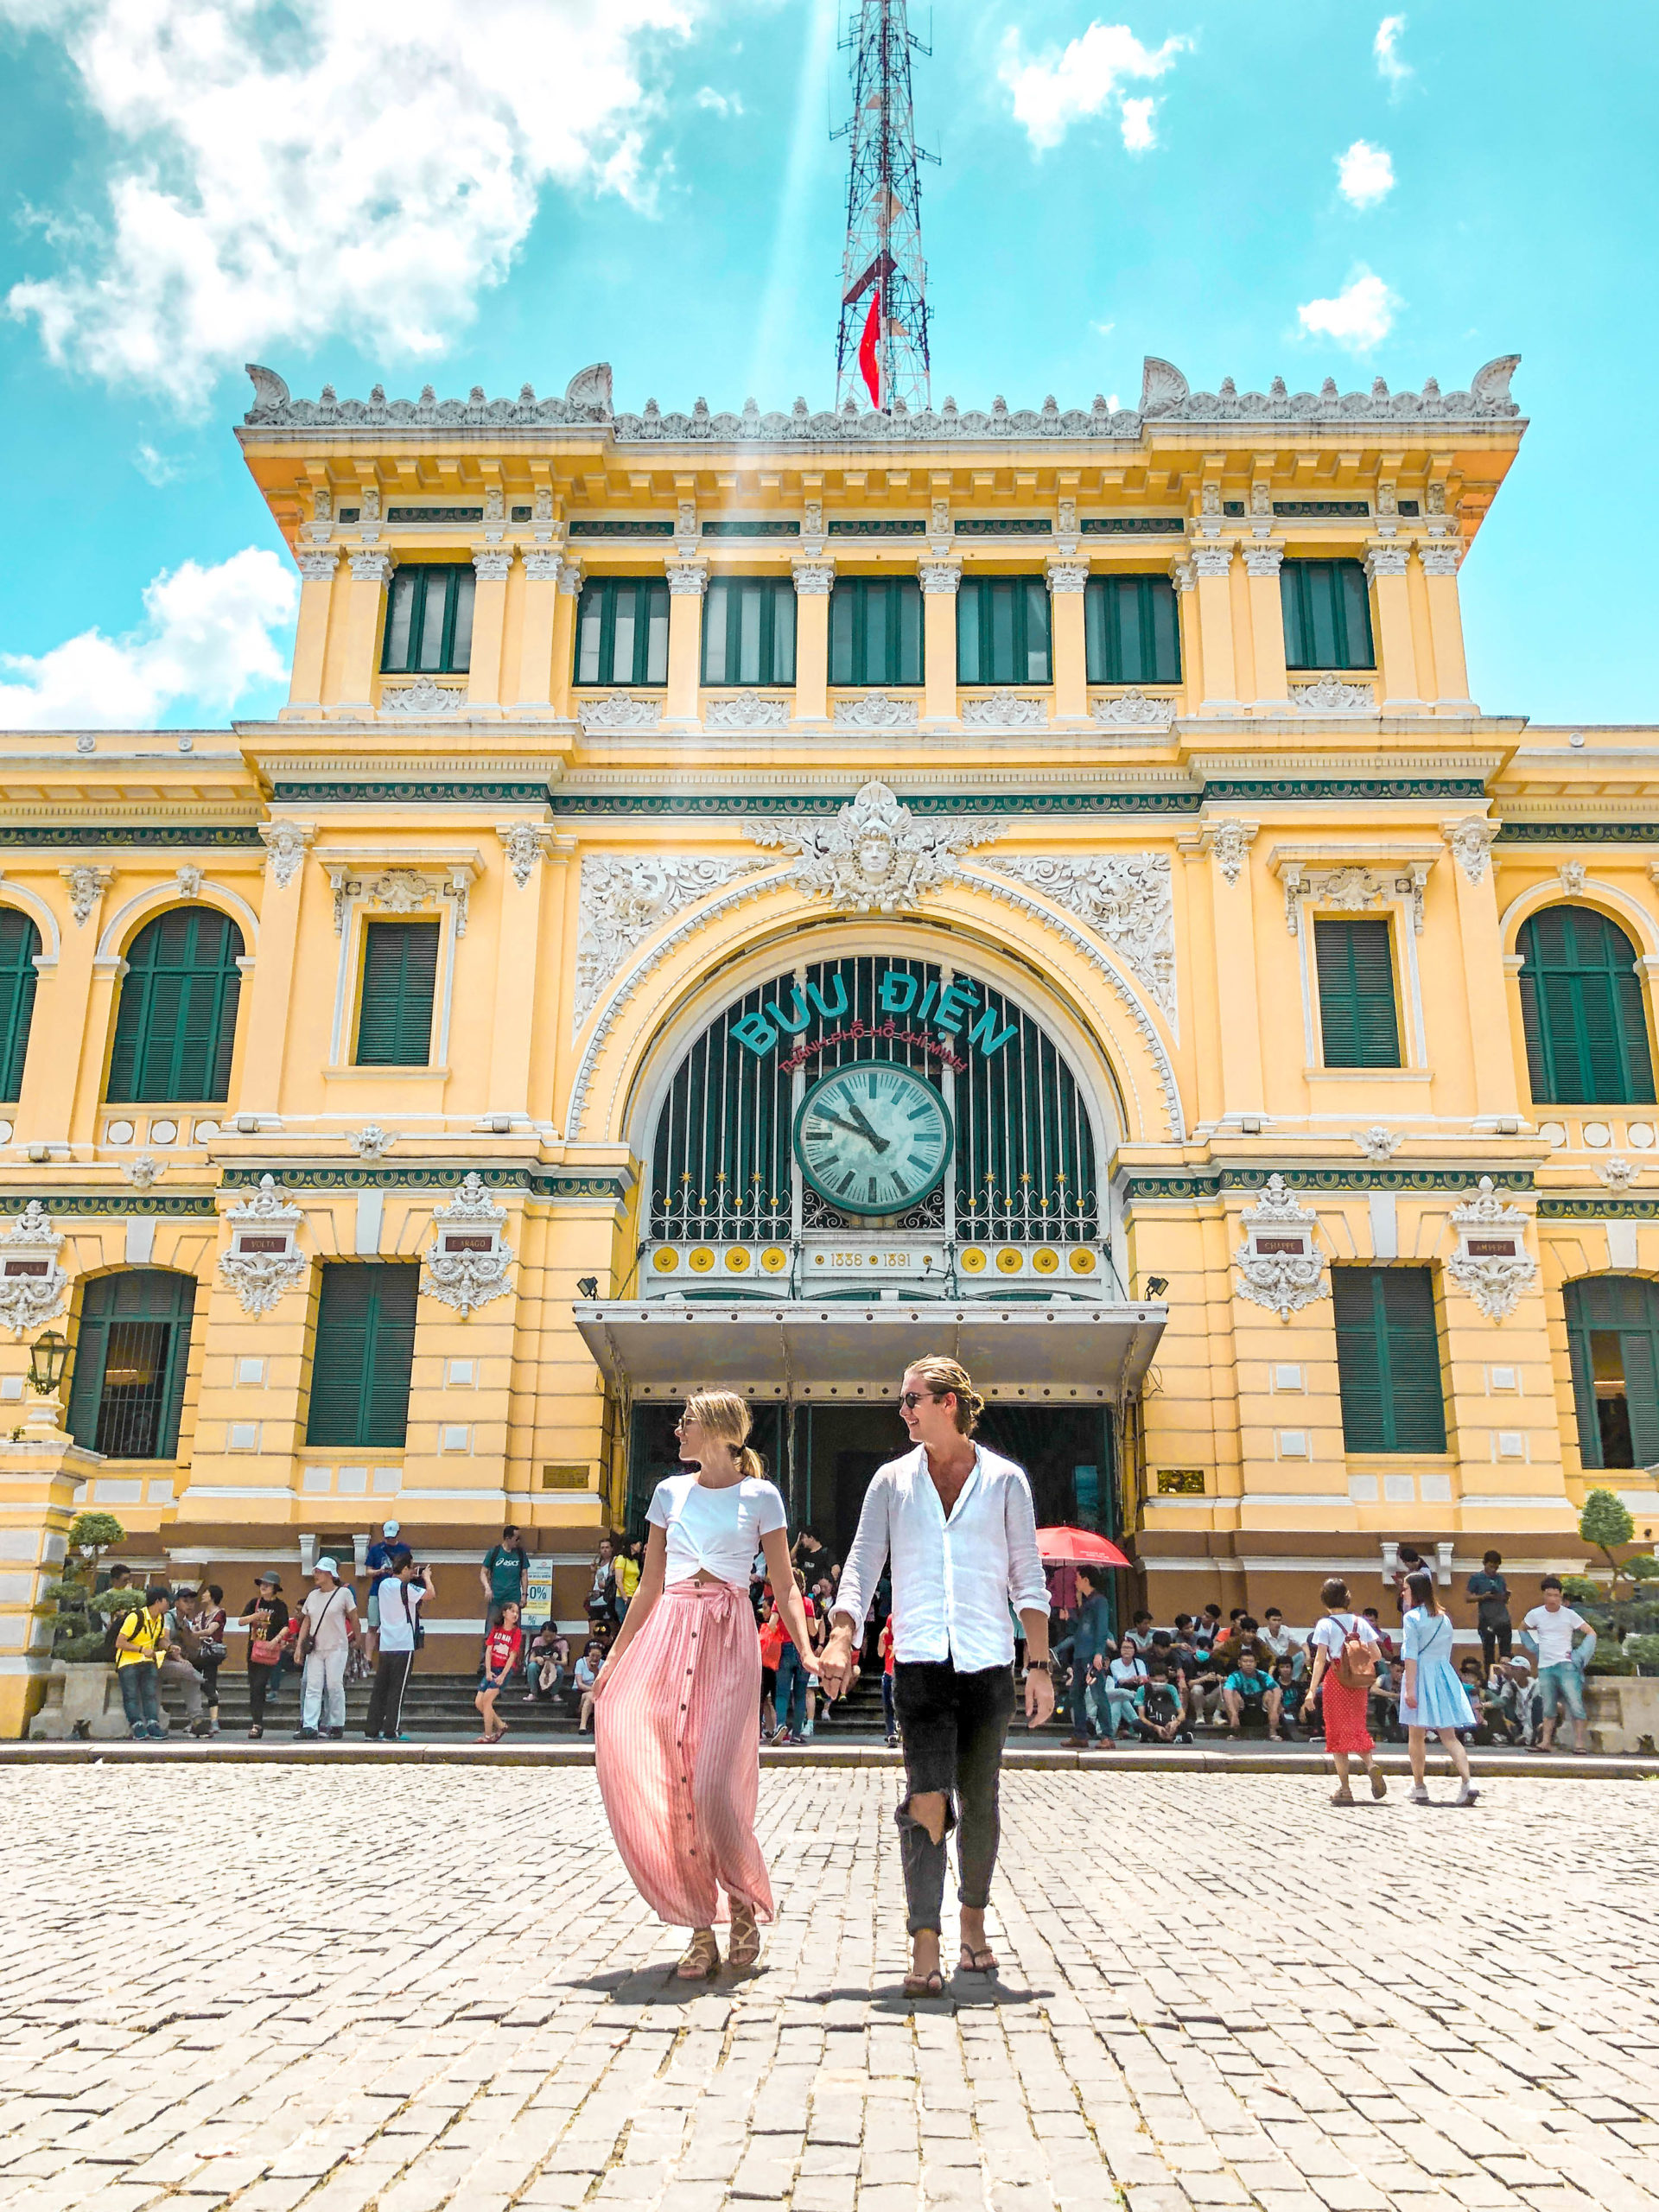 GUIDE TO HO CHI MINH - central post office